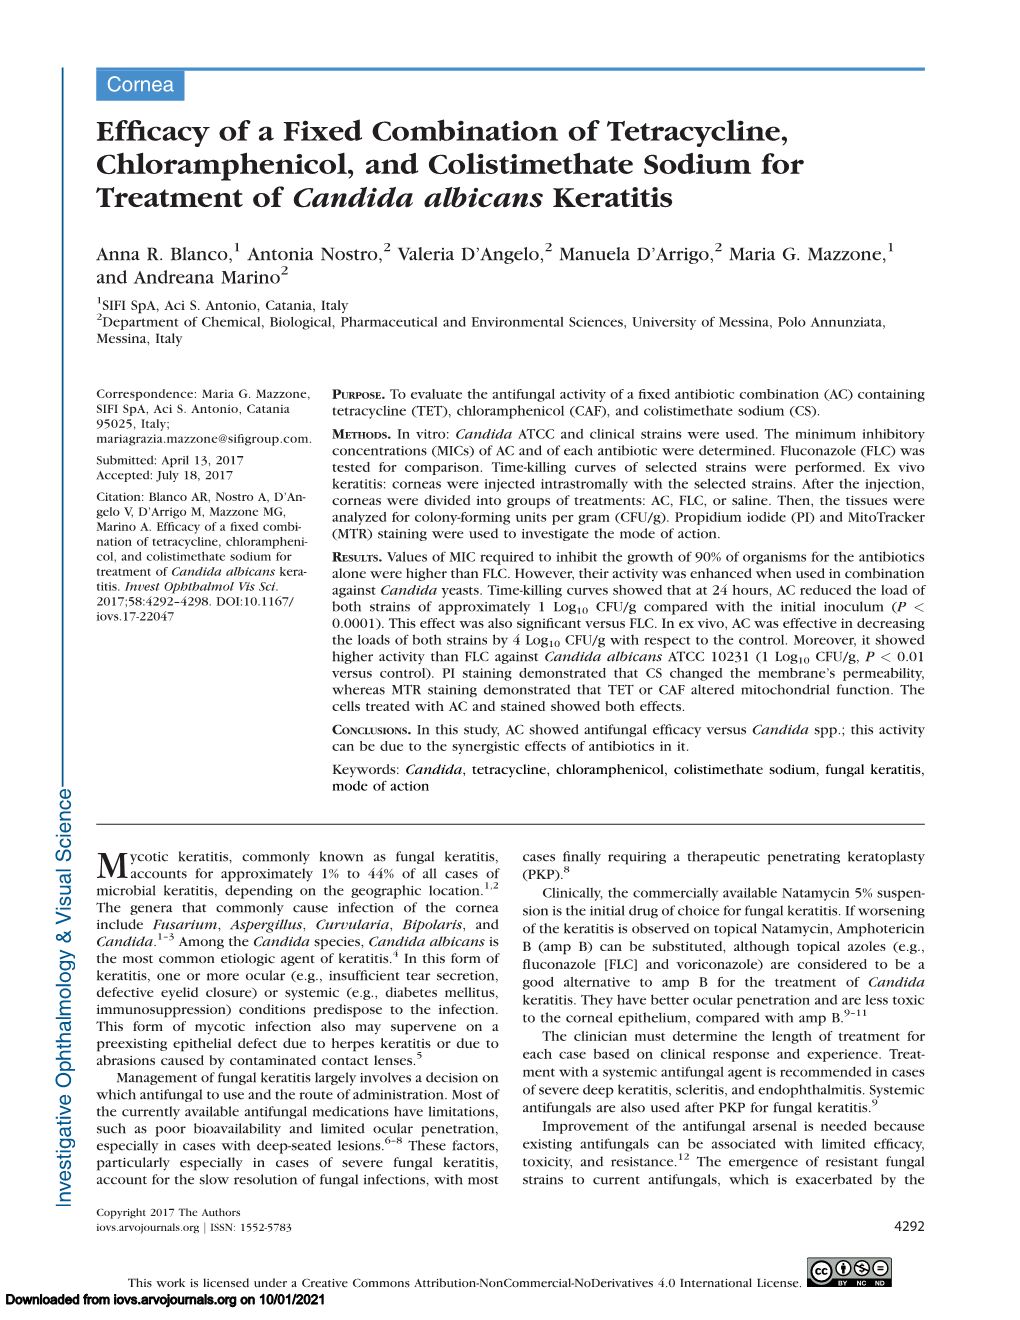 Efficacy of a Fixed Combination of Tetracycline, Chloramphenicol, and Colistimethate Sodium for Treatment of Candida Albicans Ke